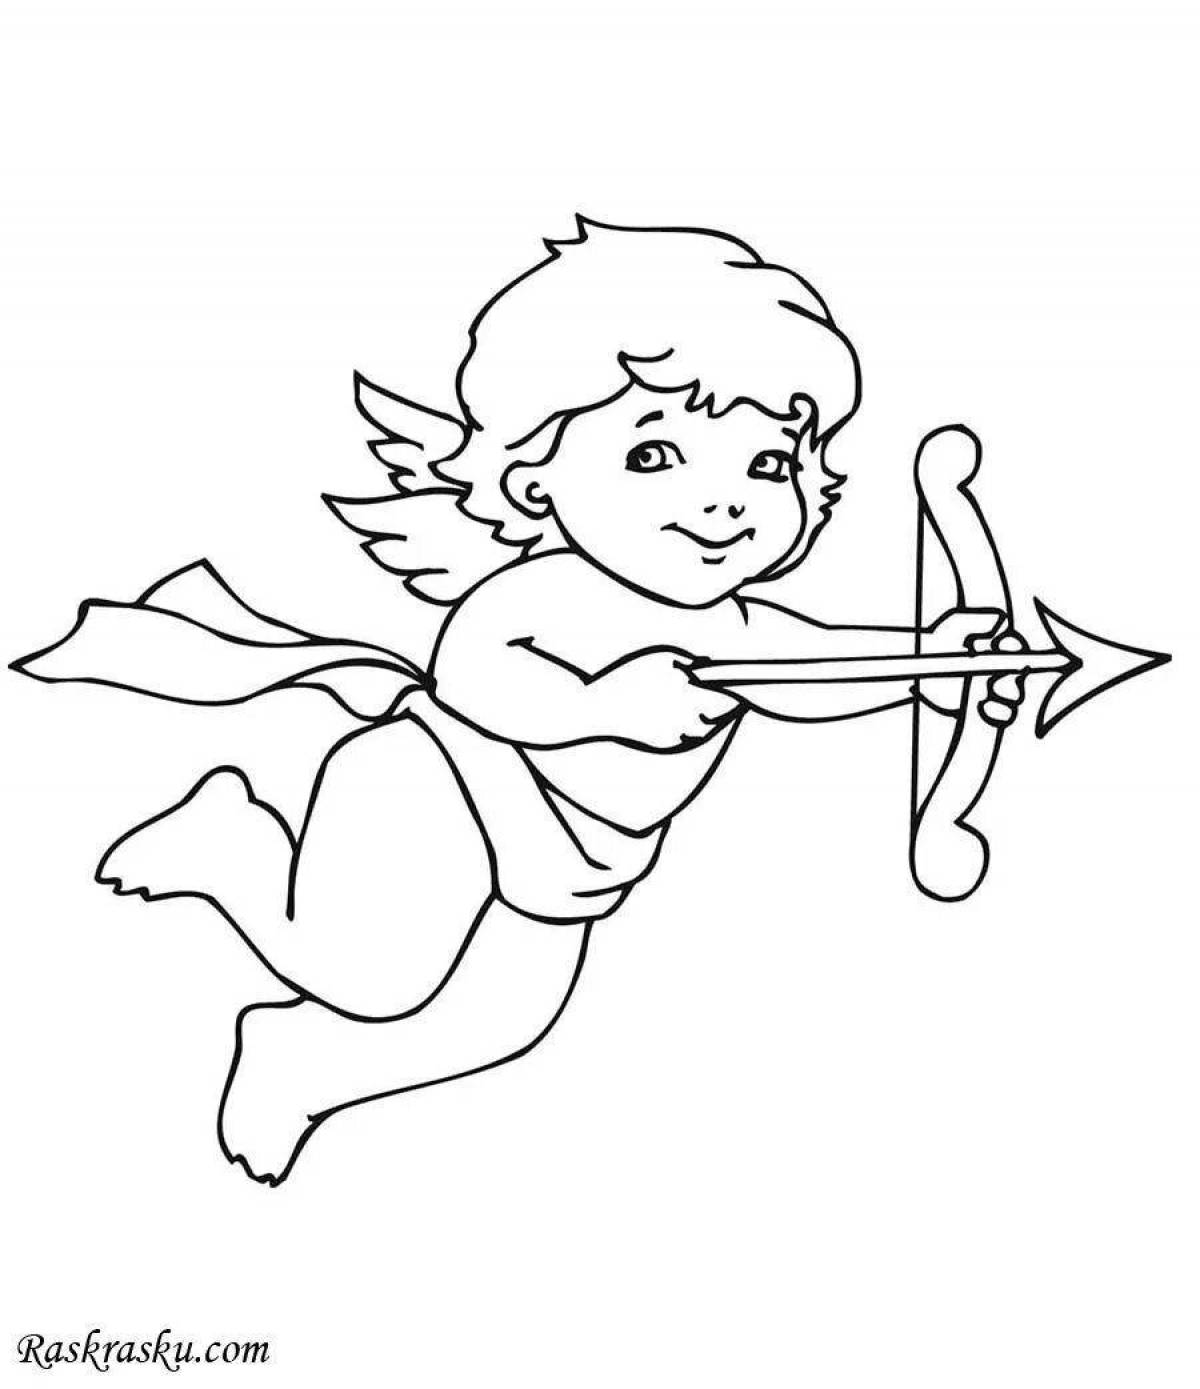 Humorous cupid with heart coloring book